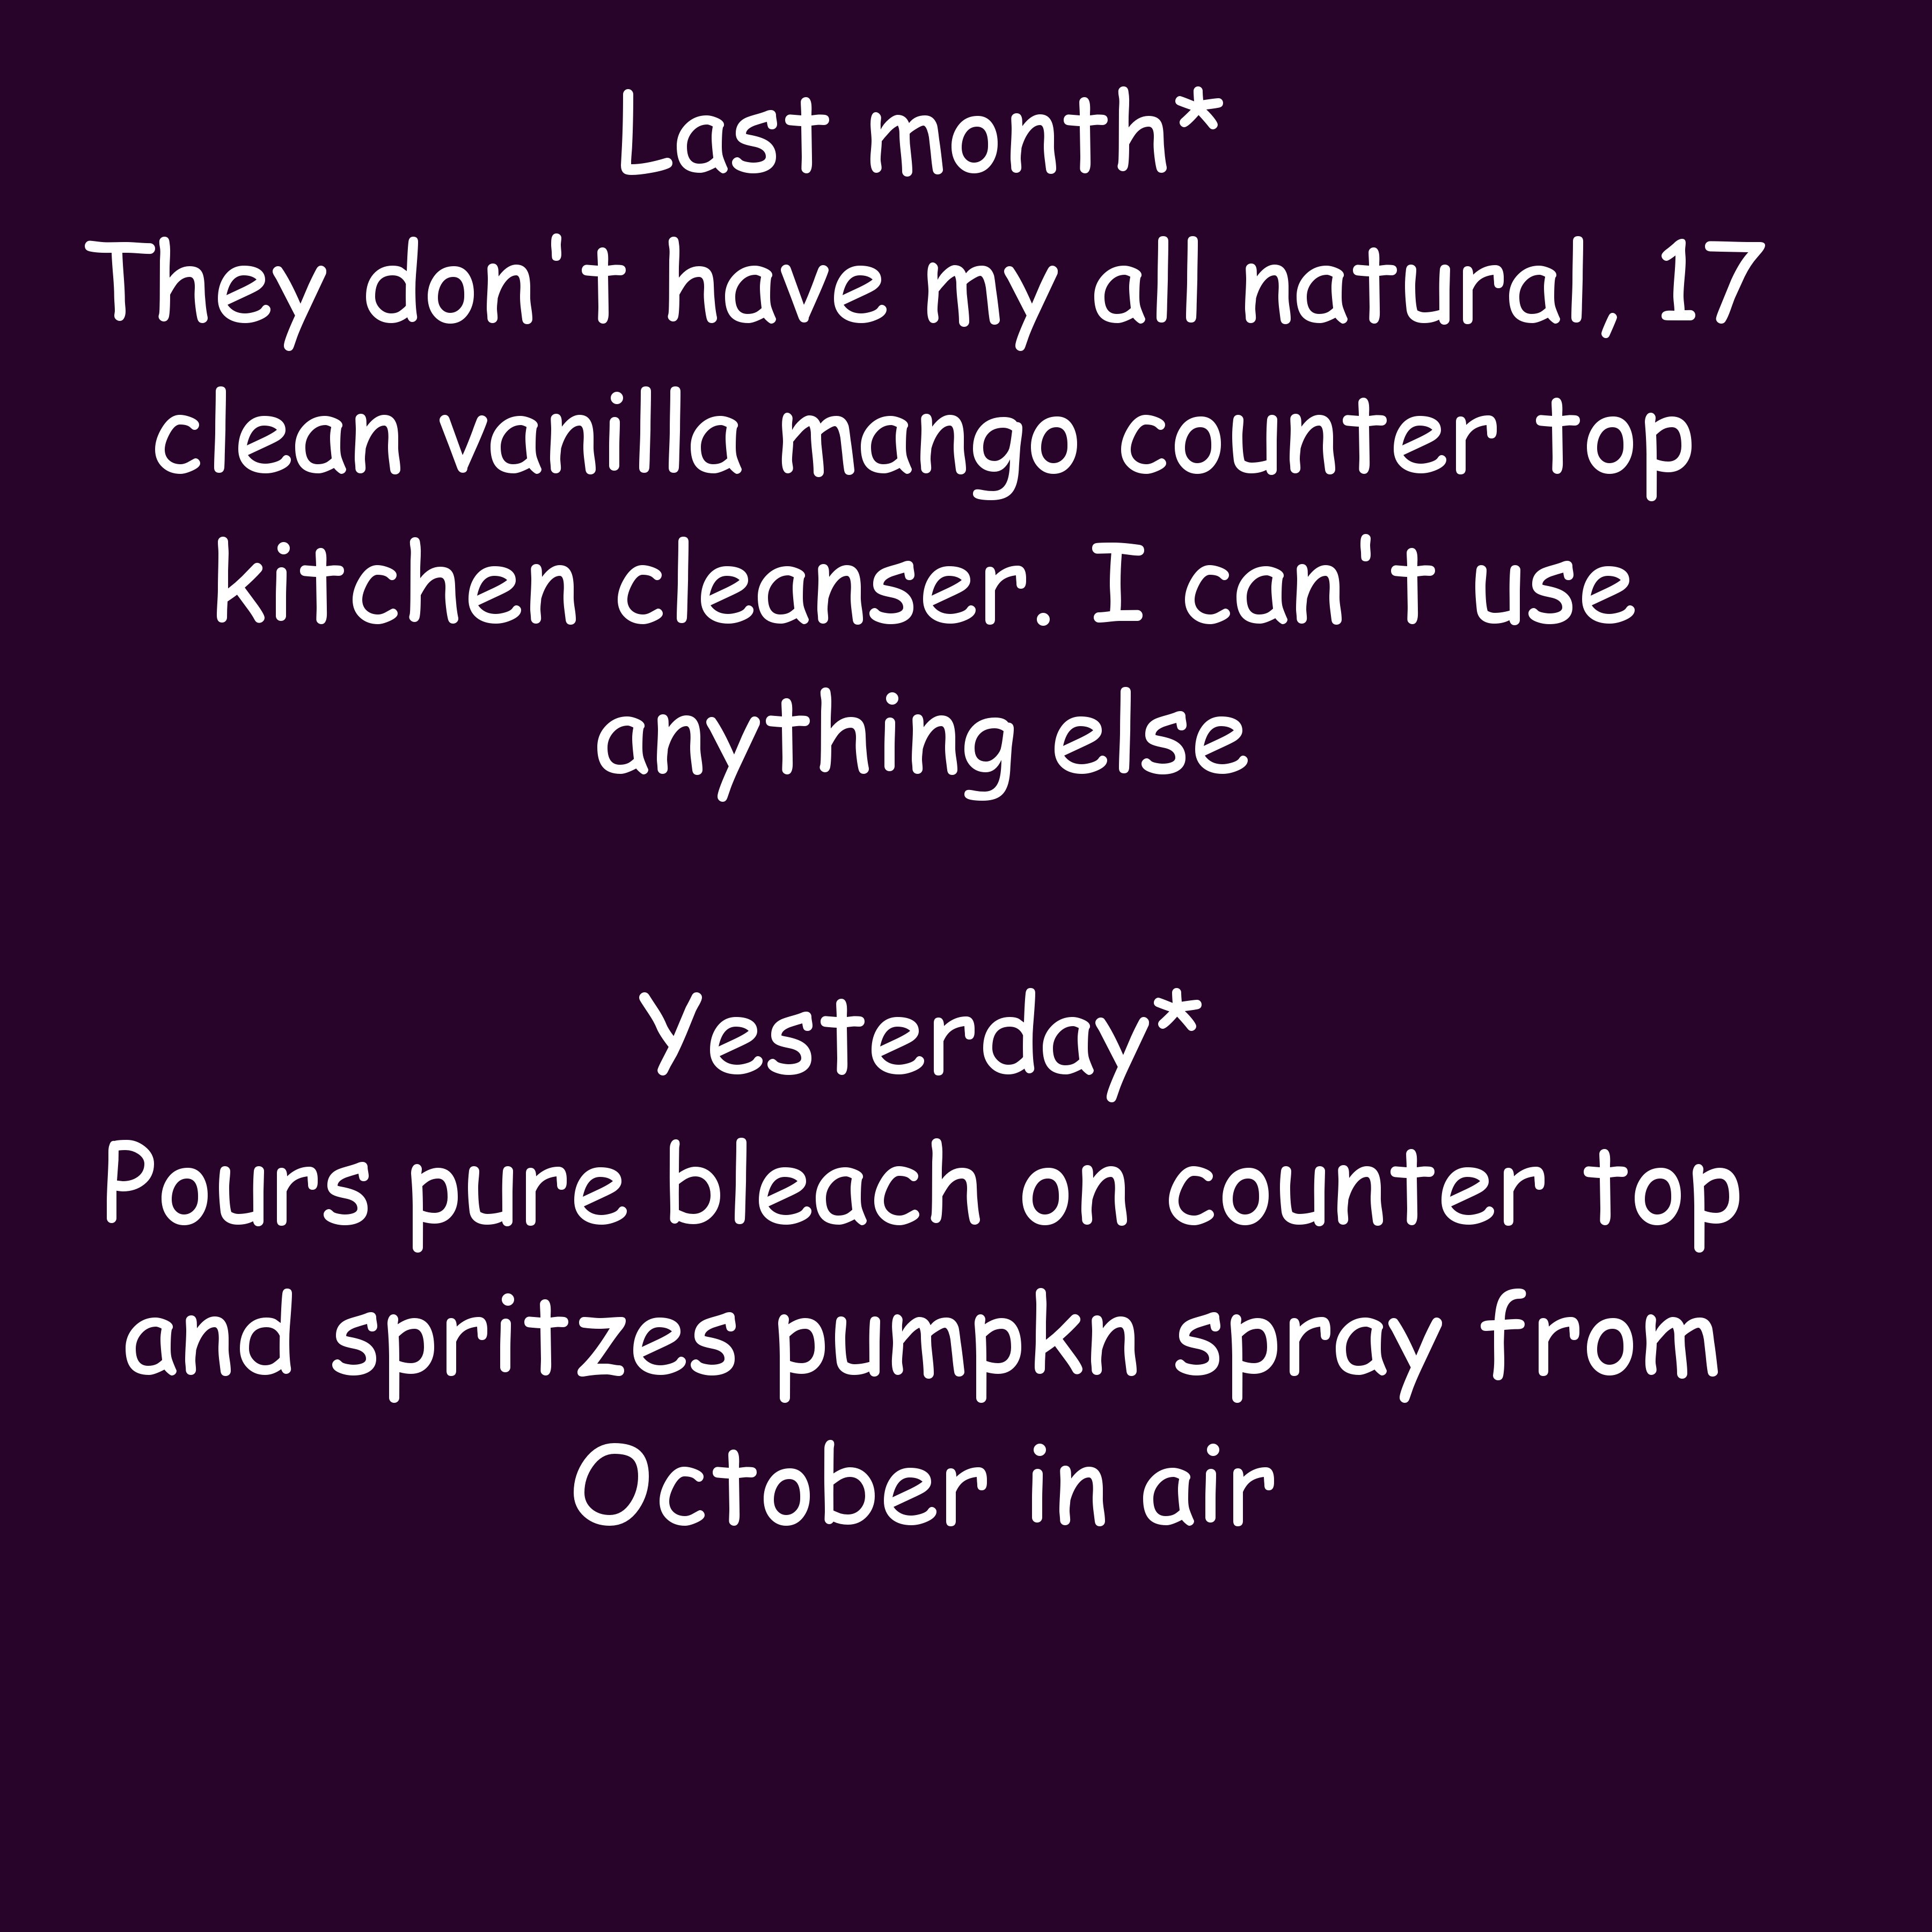 barely alive - Last month They don't have my all natural, 17 clean vanilla mango counter top kitchen cleanser. I can't use anything else Yesterday Pours pure bleach on counter top and spritzes pumpkn spray from October in air